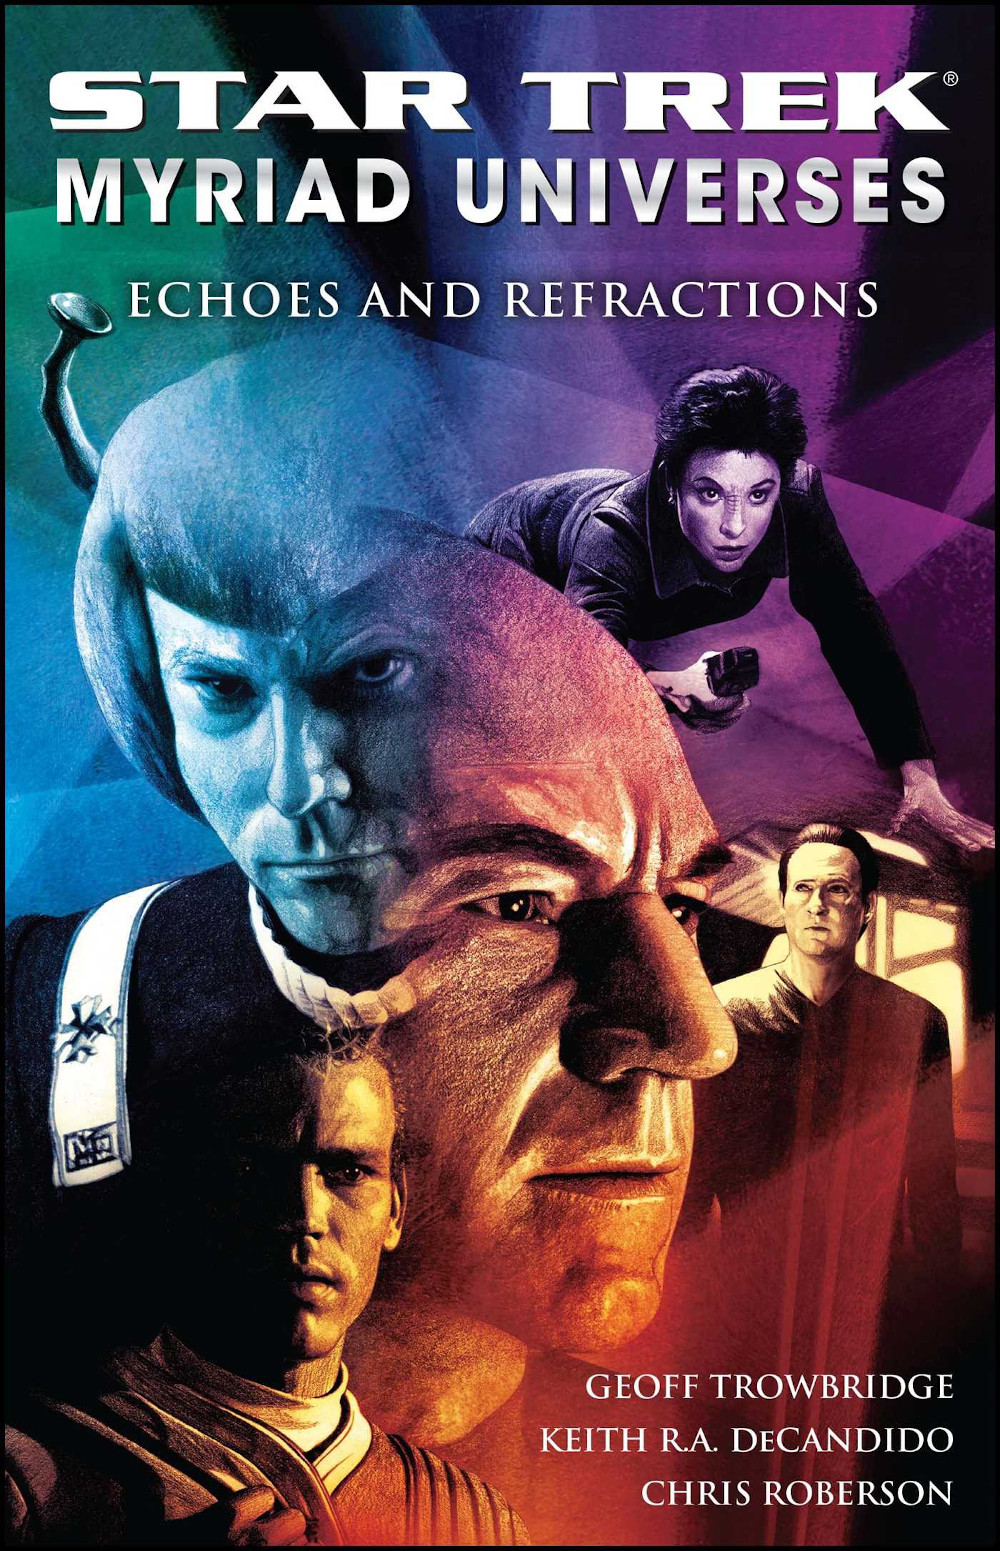 Echoes and Refractions (Aug 2008)